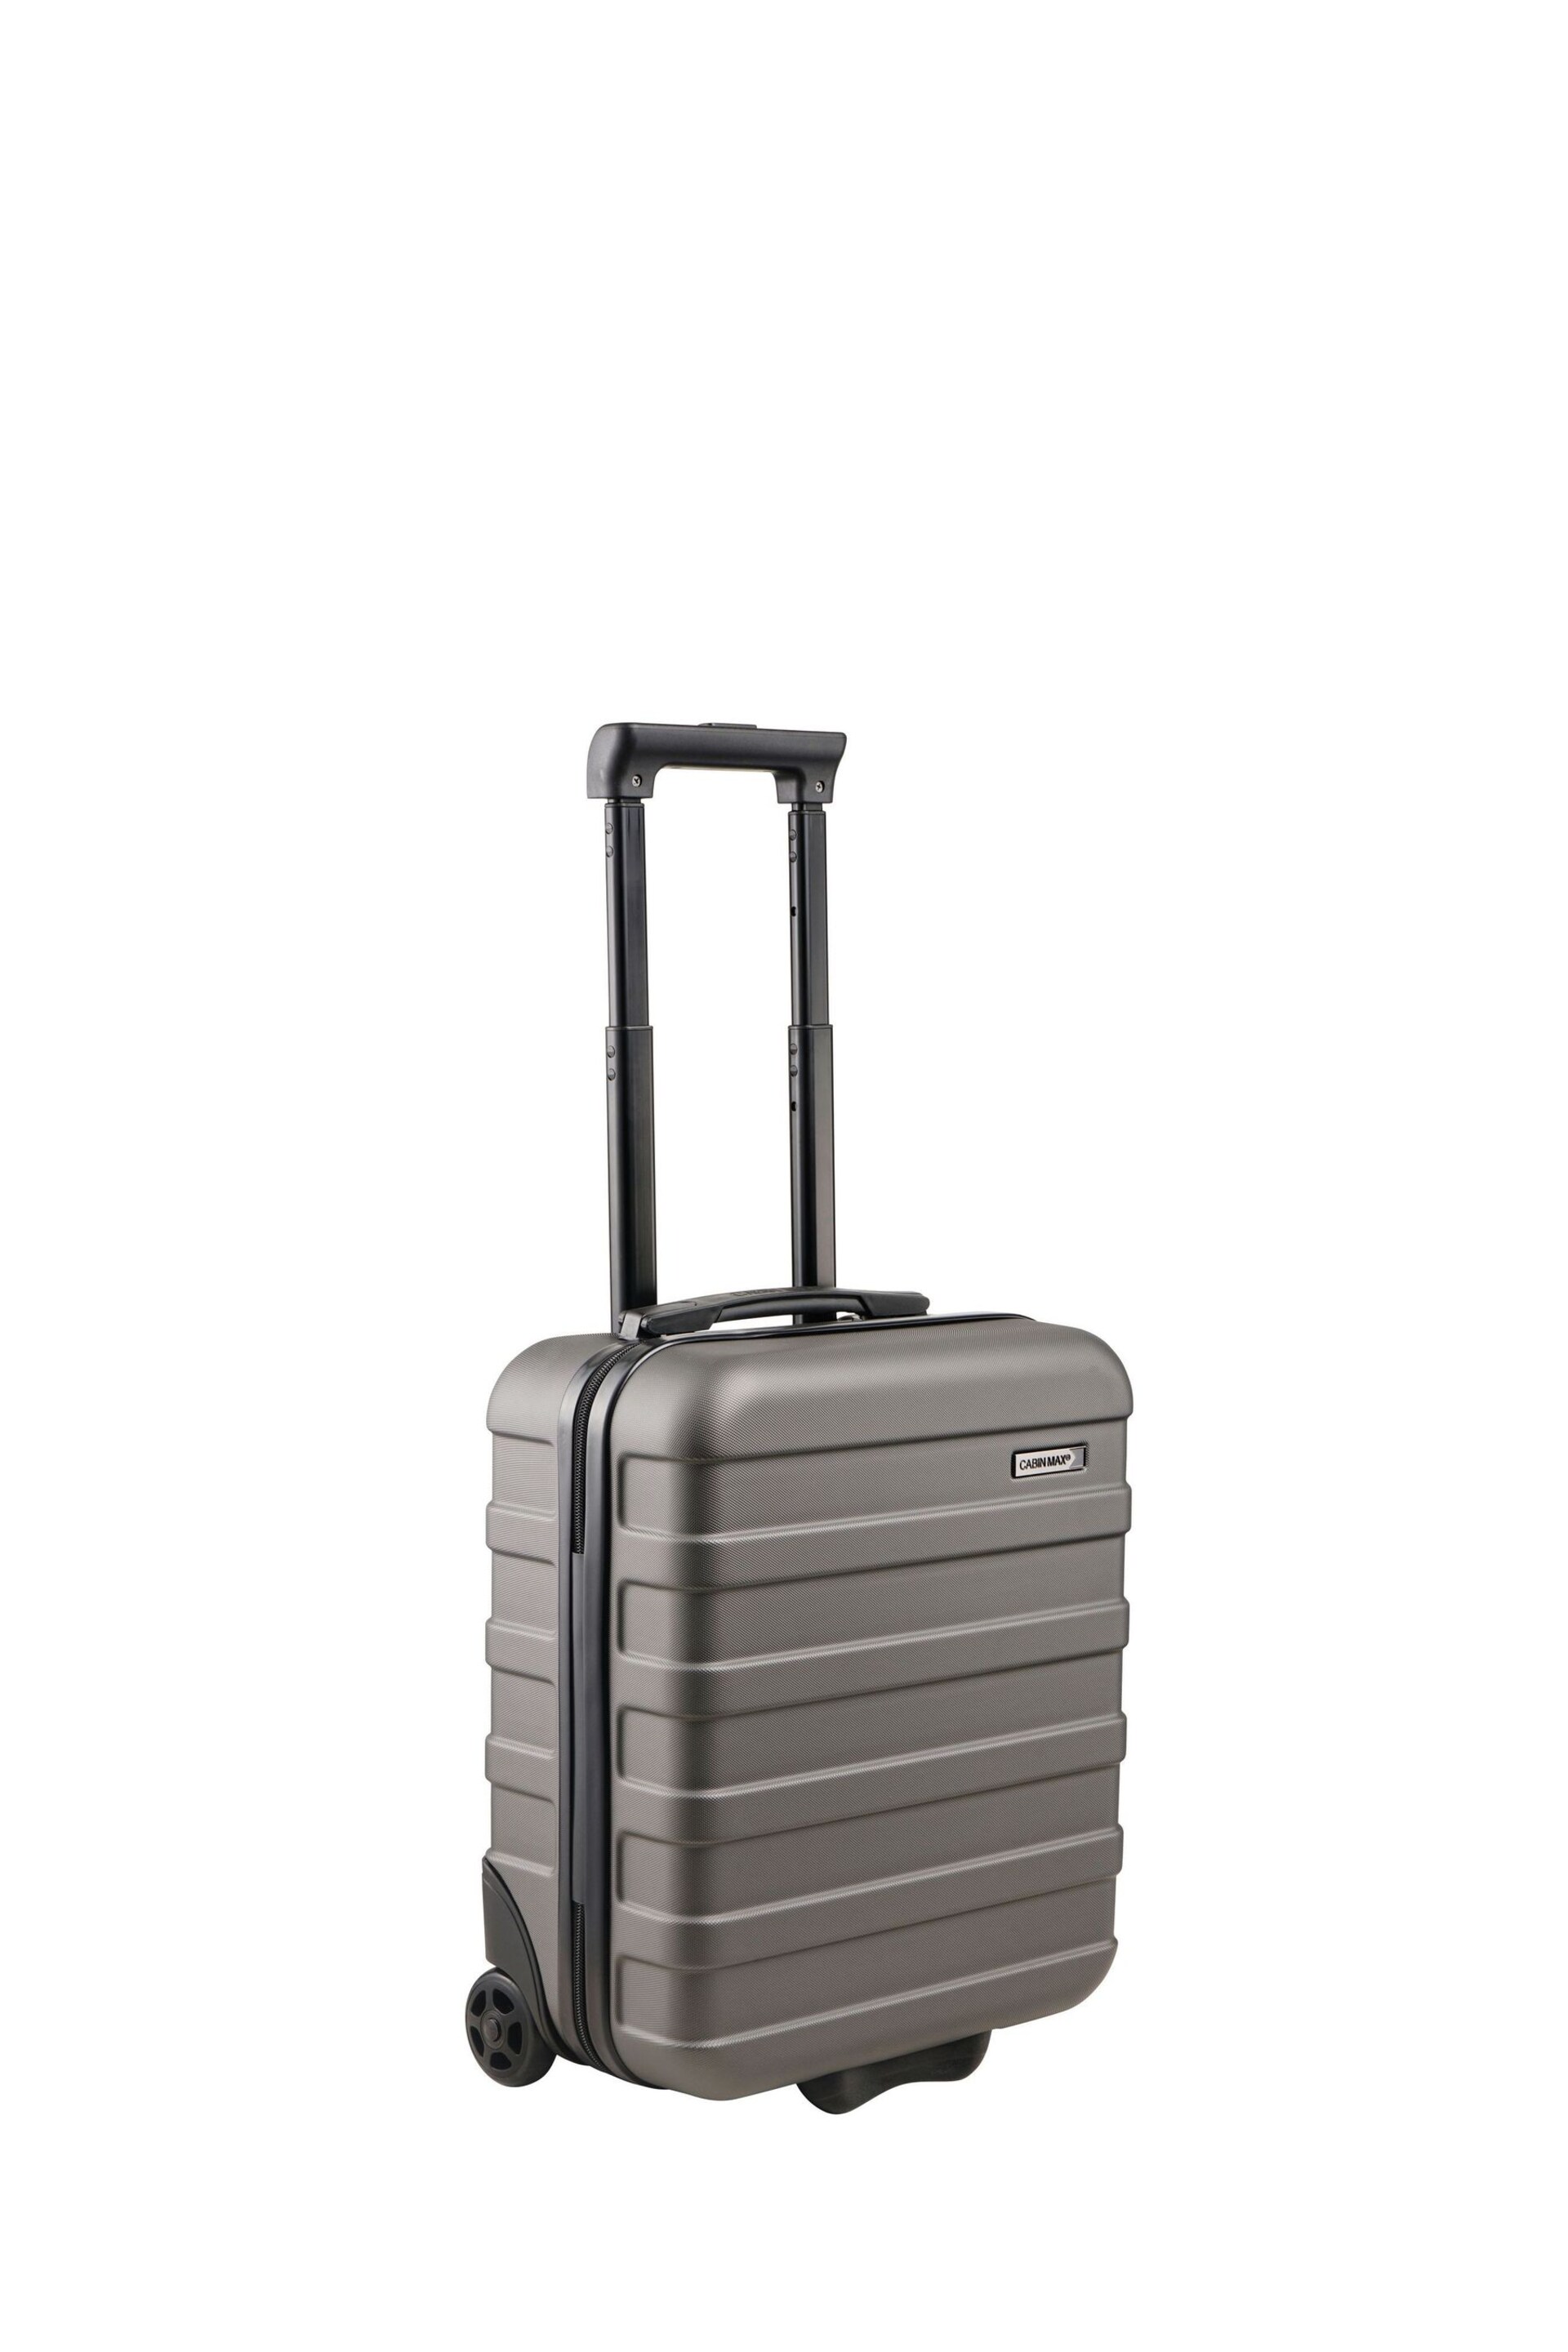 Cabin Max Anode Two Wheel Carry On Underseat 45cm Suitcase - Image 2 of 5